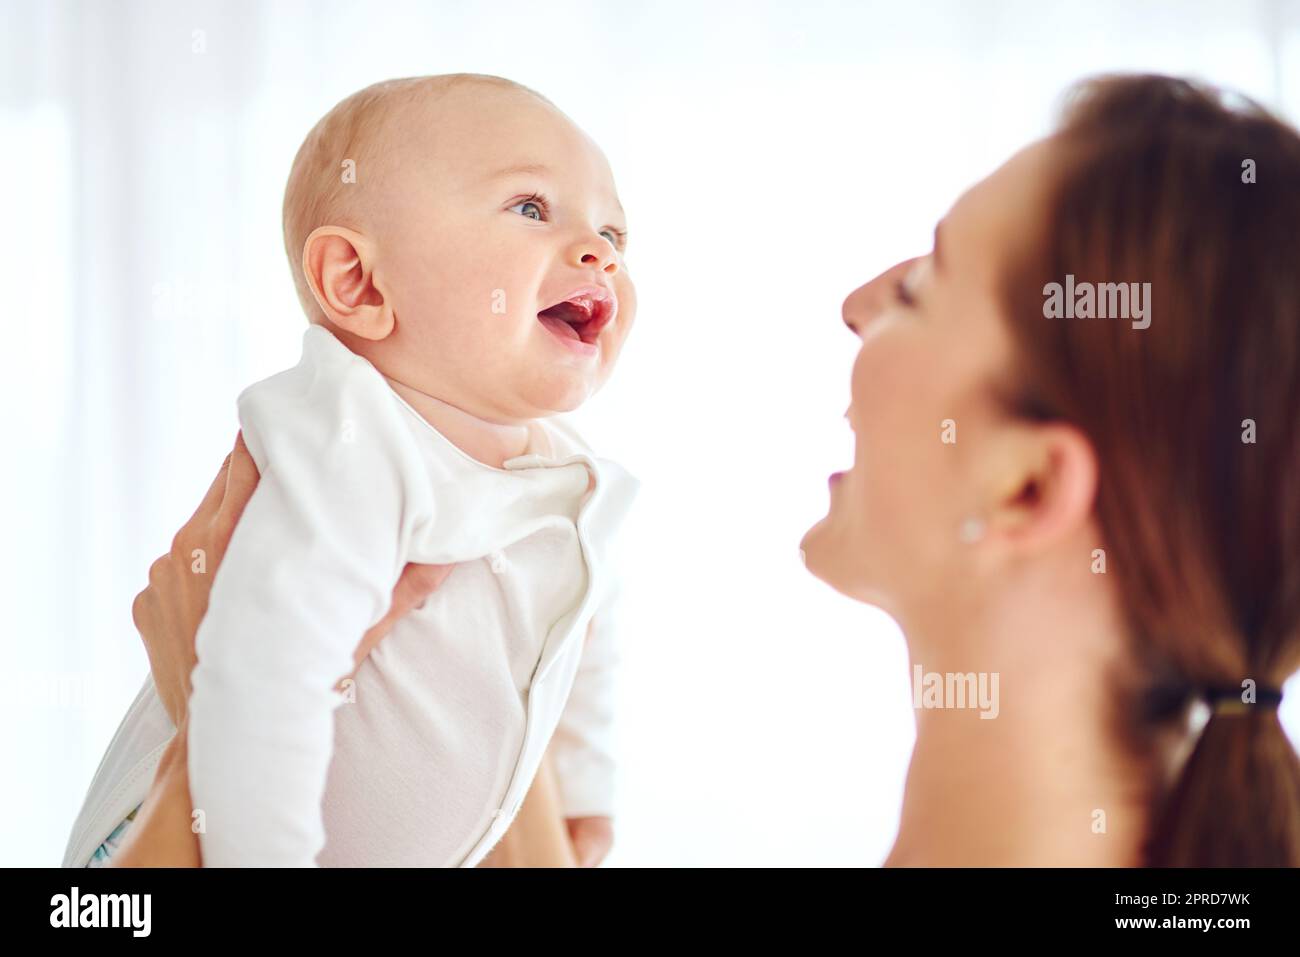 Loving, caring and smiling mother carrying her baby at home bonding. Female embracing motherhood holding her baby in the air enjoying a sweet moment of love, care and happiness in the joy of life. Stock Photo